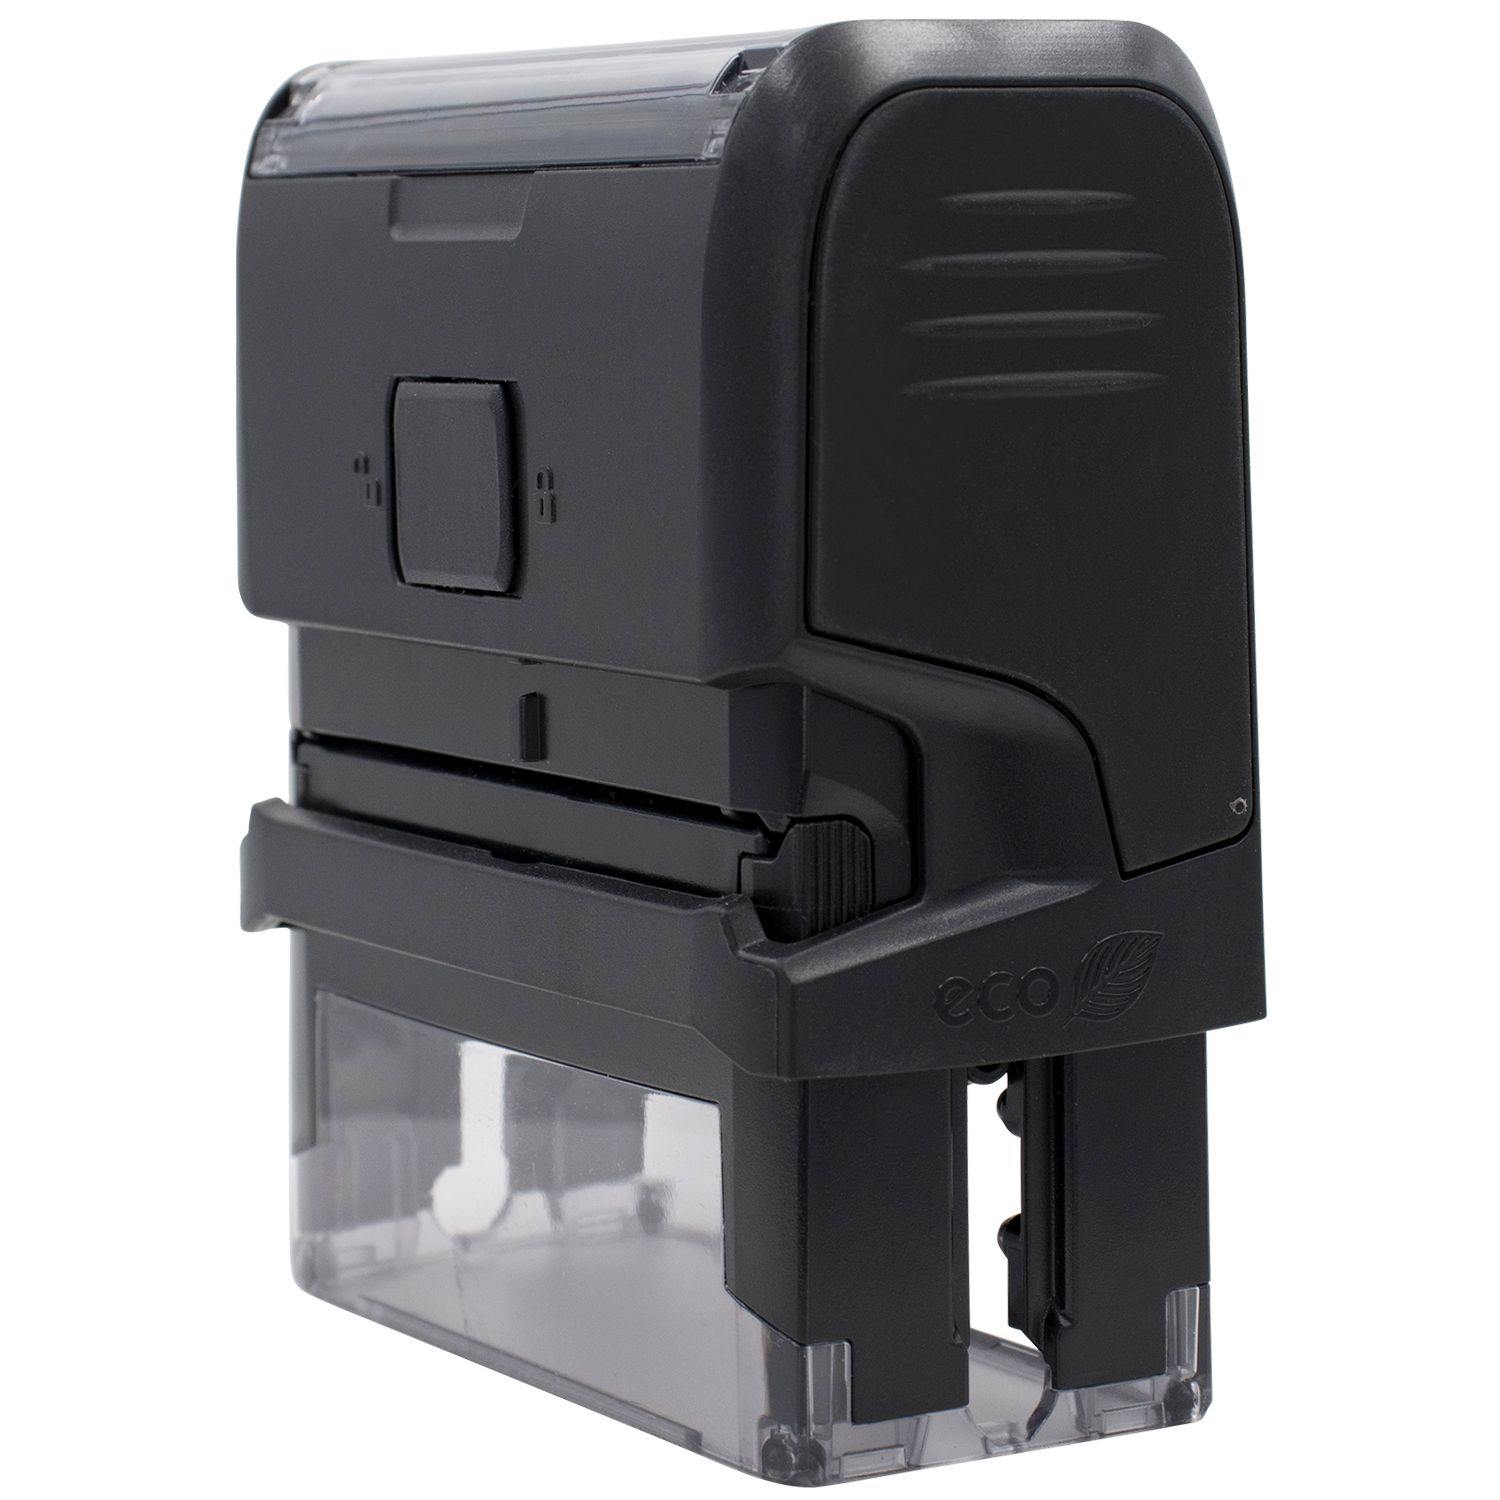 Self Inking Smoker Stamp - Engineer Seal Stamps - Brand_Trodat, Impression Size_Small, Stamp Type_Self-Inking Stamp, Type of Use_Medical Office